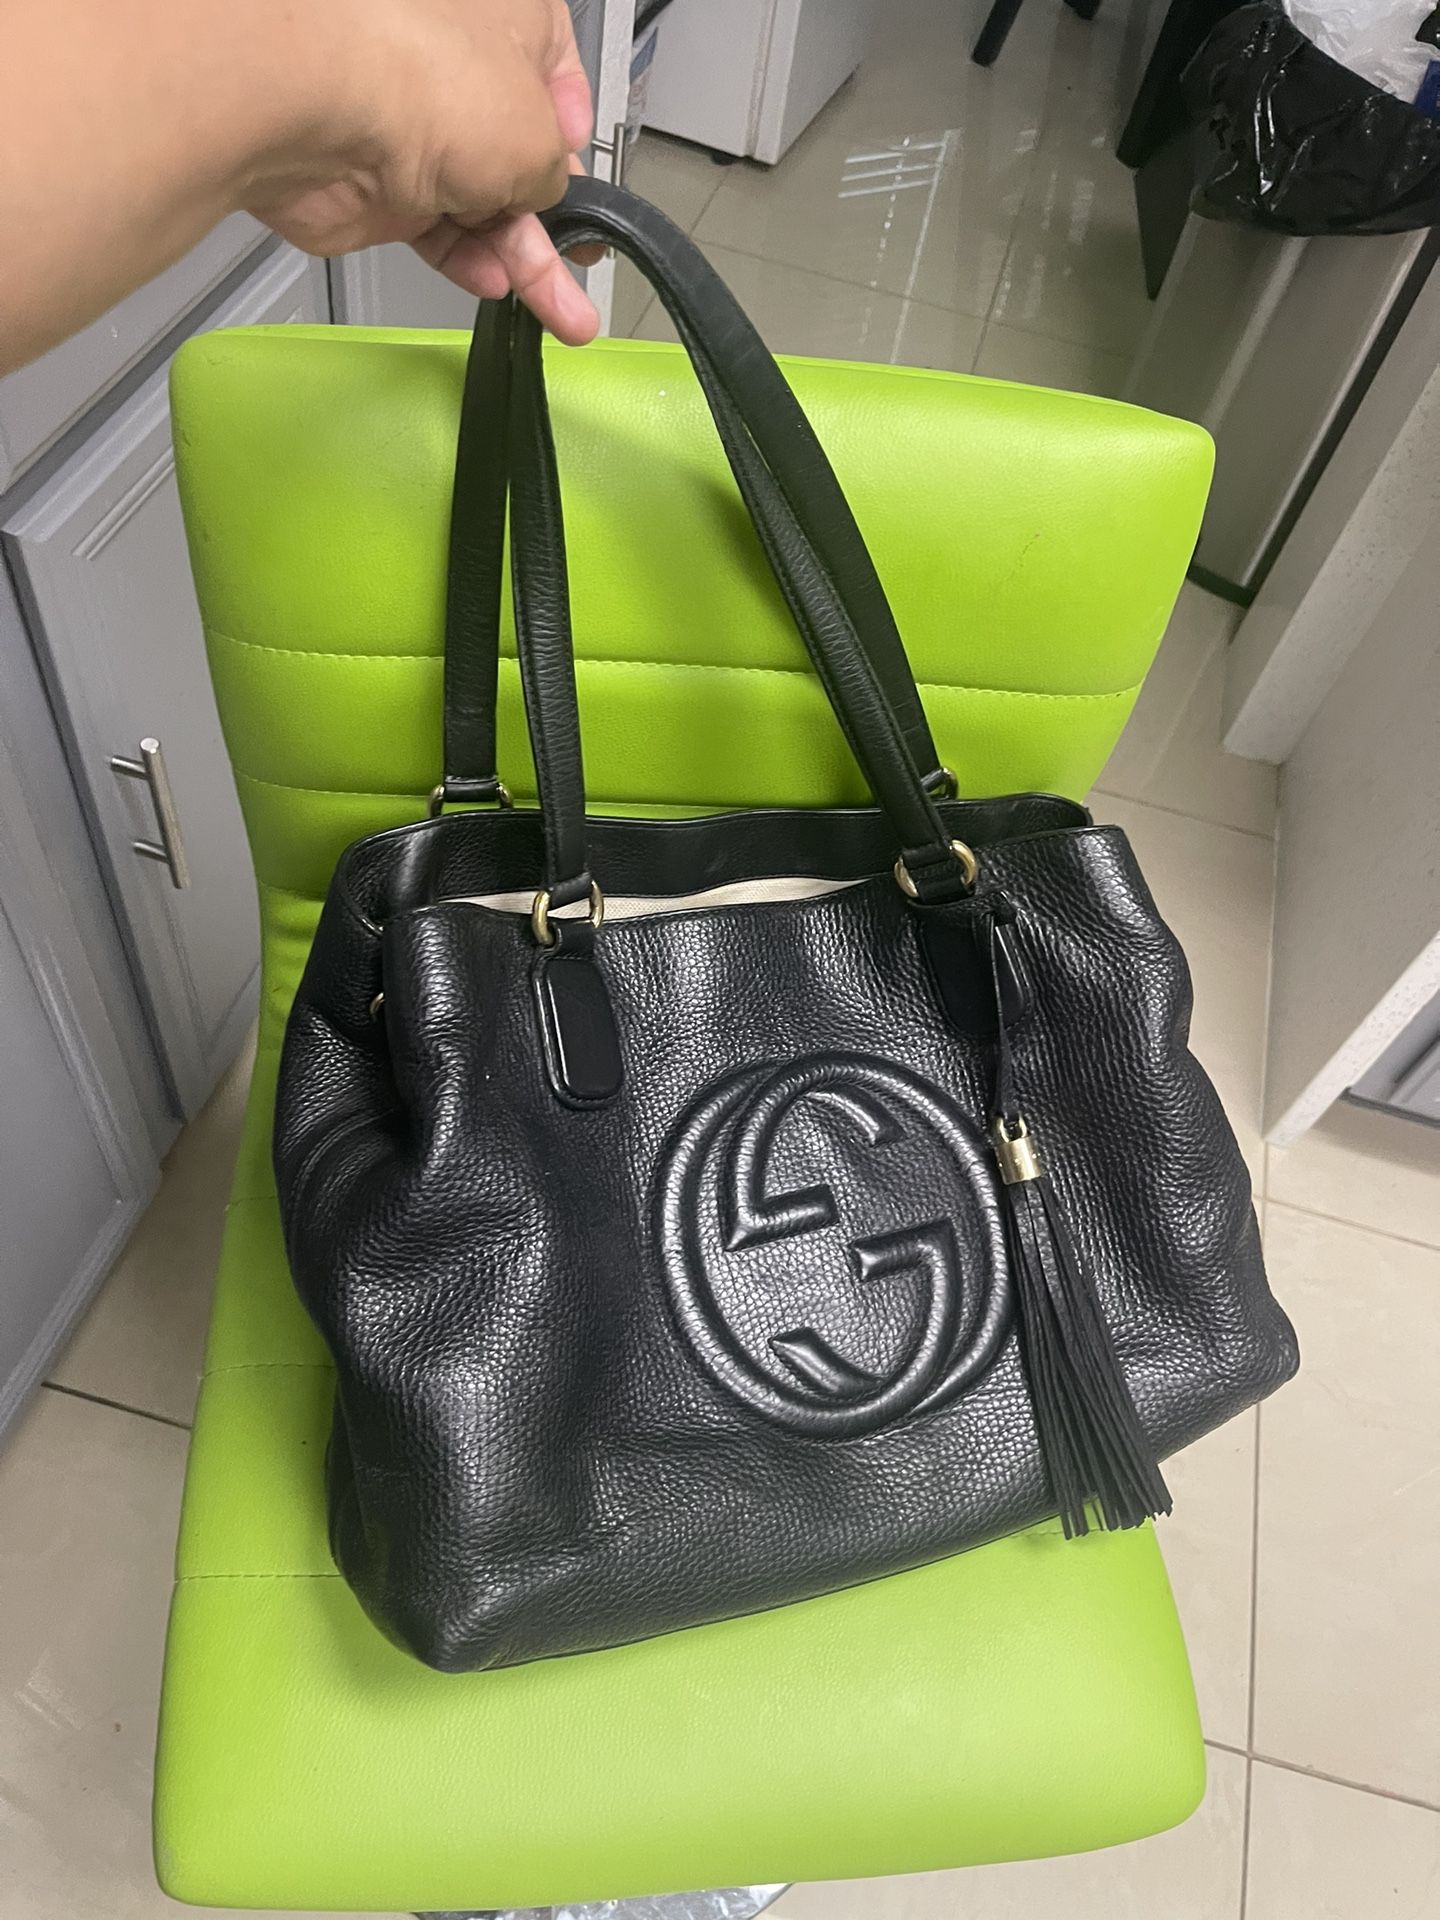 Large Leather Gucci Bag Excellent Condition O Ly Some Stains Inside No Smell No Smoking Price Is Firm 